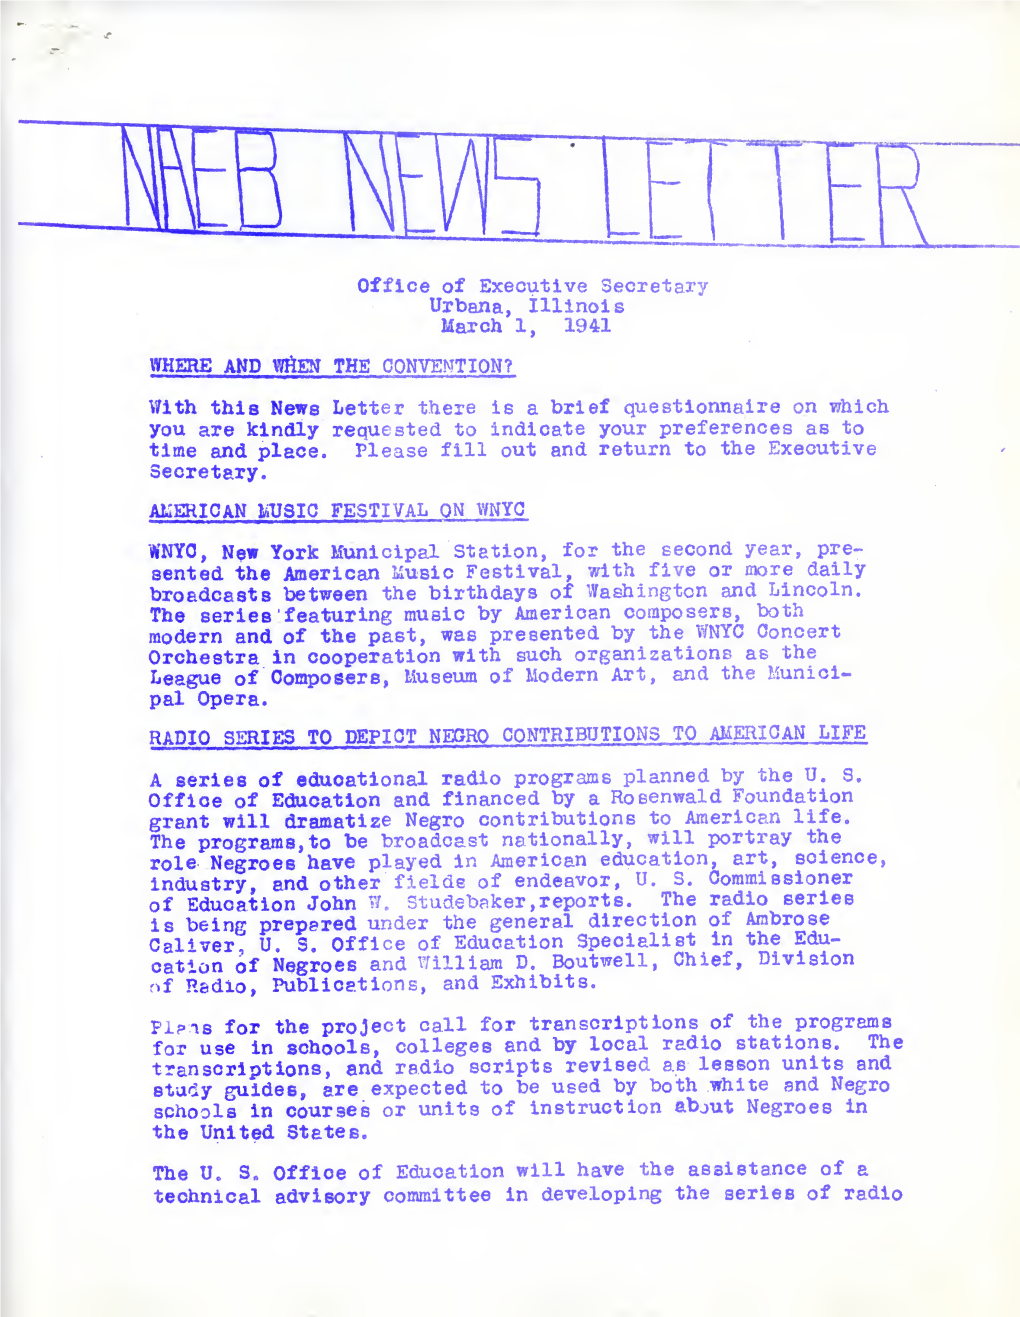 NAEB Newsletter (March 01, 1941)